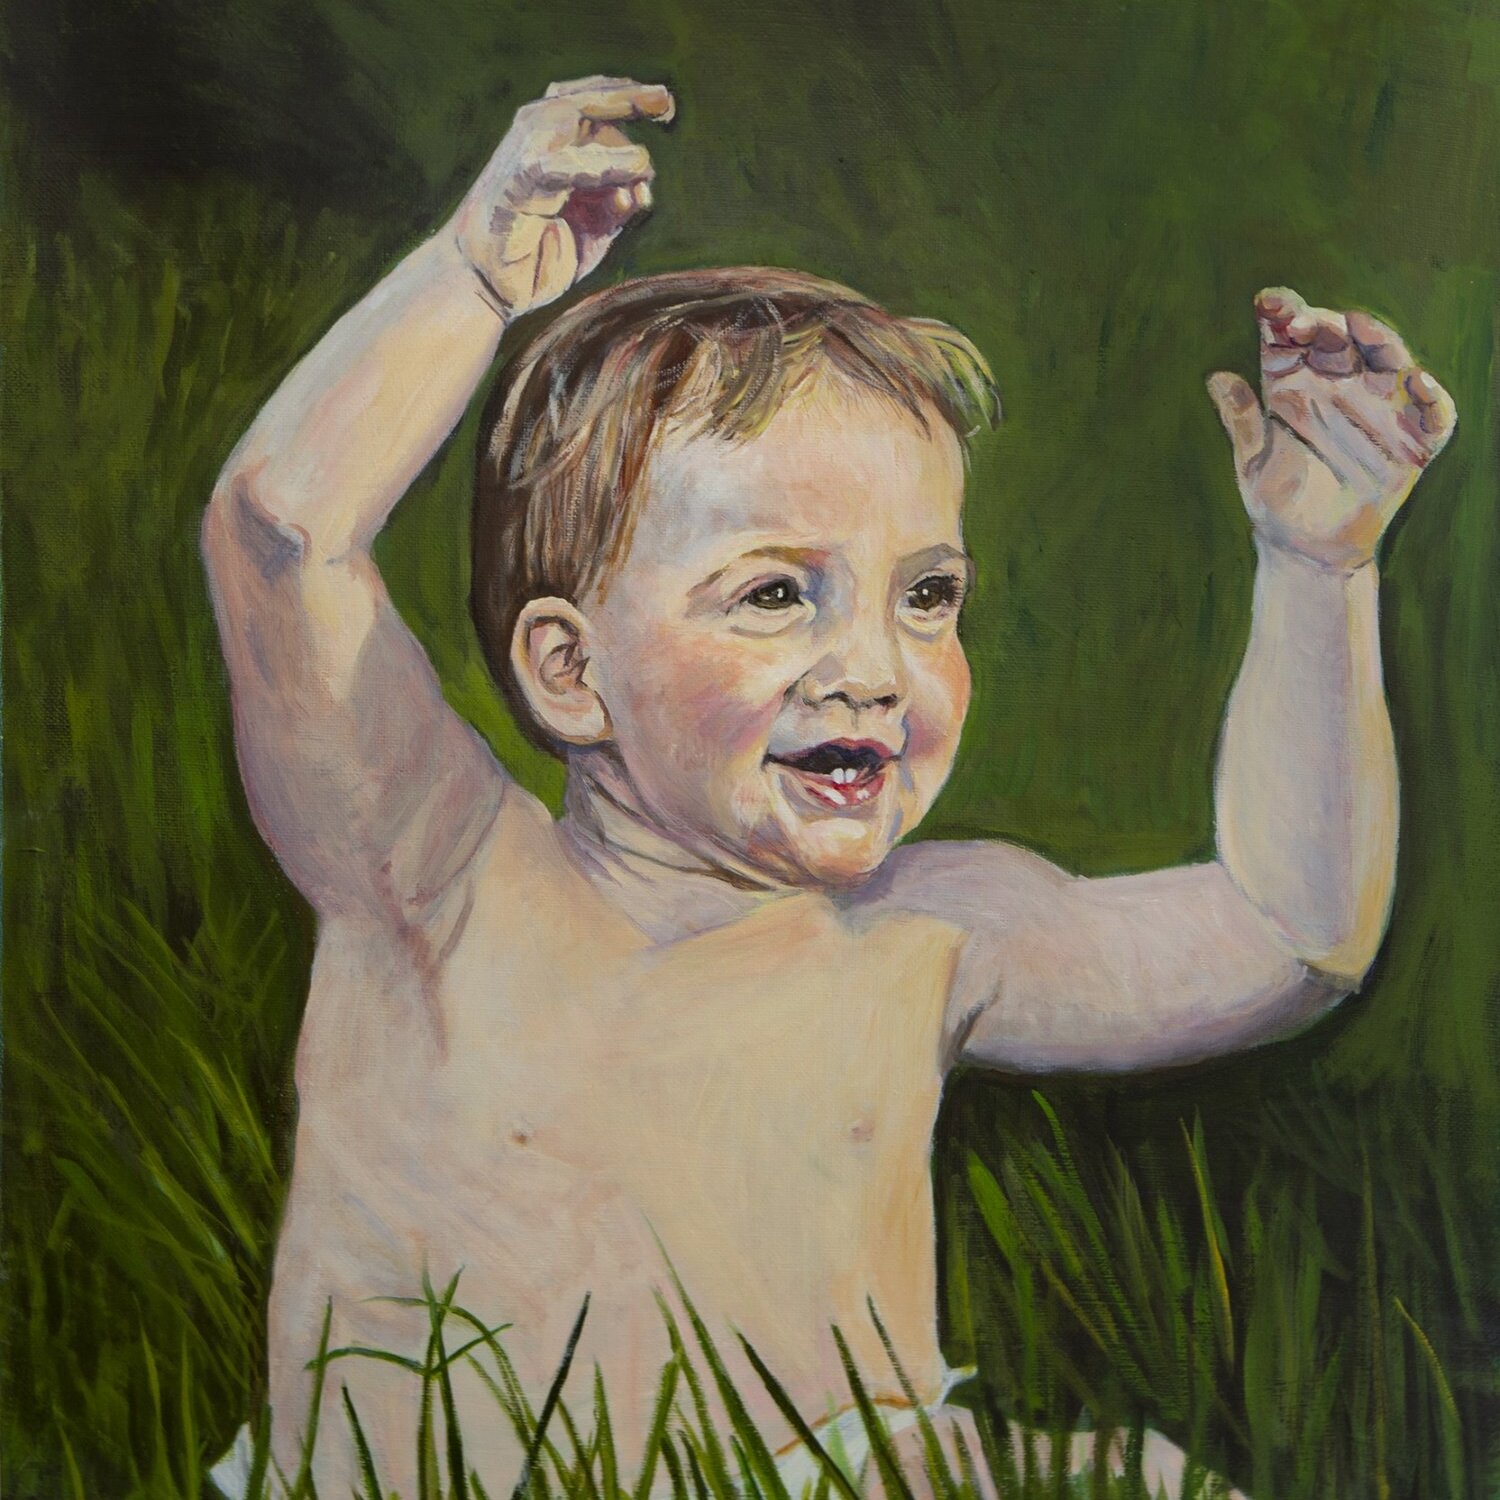 Painting of a happy small baby boy